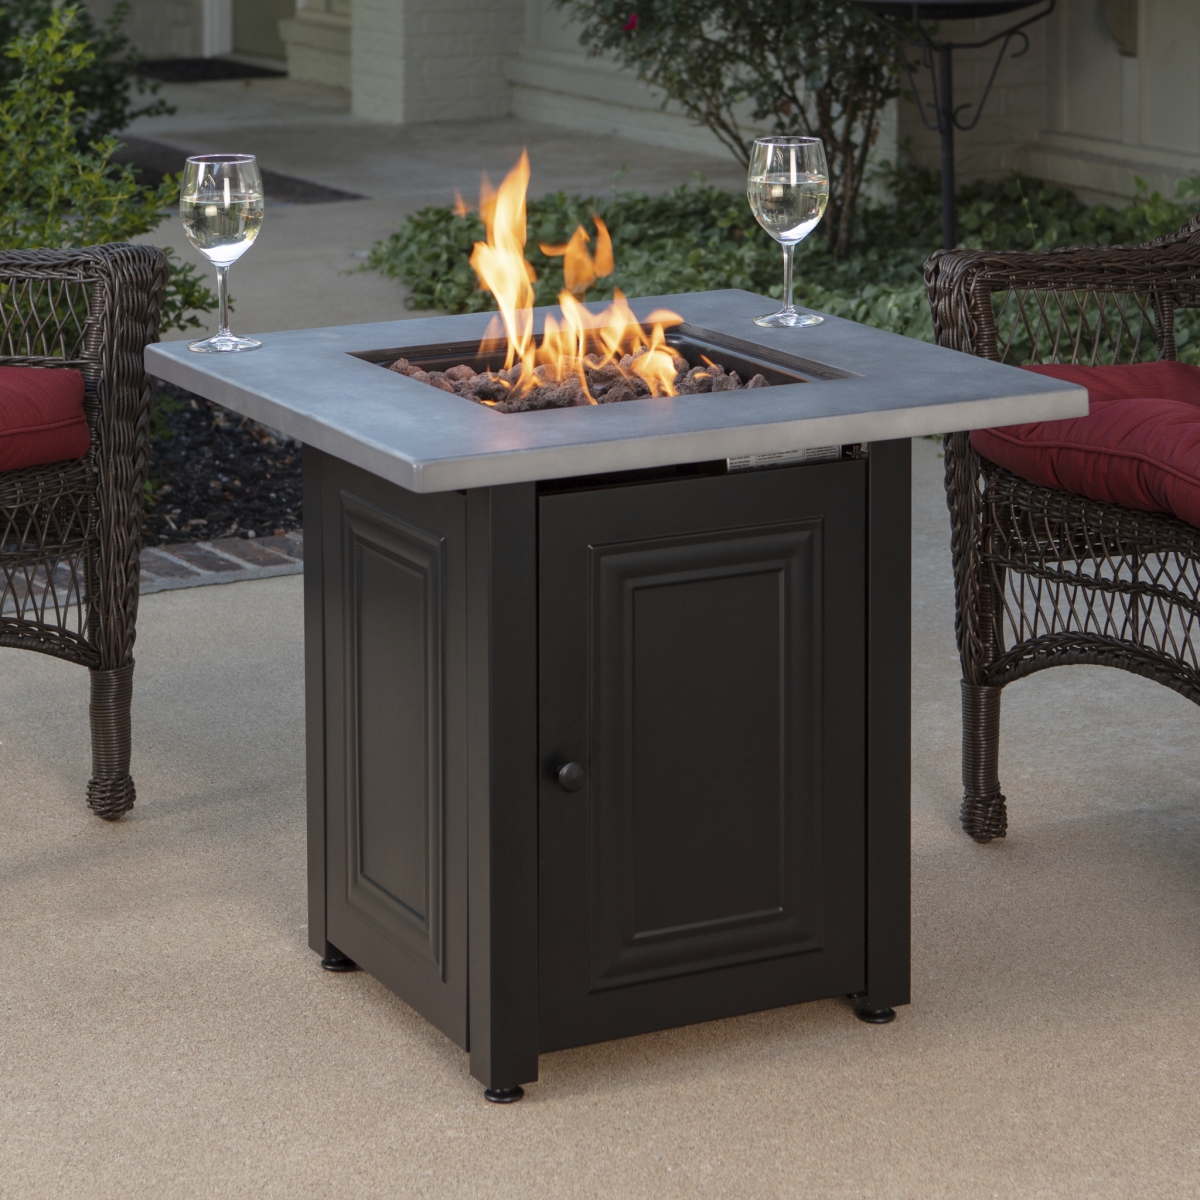 Gad15410m 28 X 28 X 25 In. The Wakefield Outdoor Lp Fire Pit - Grey & Black